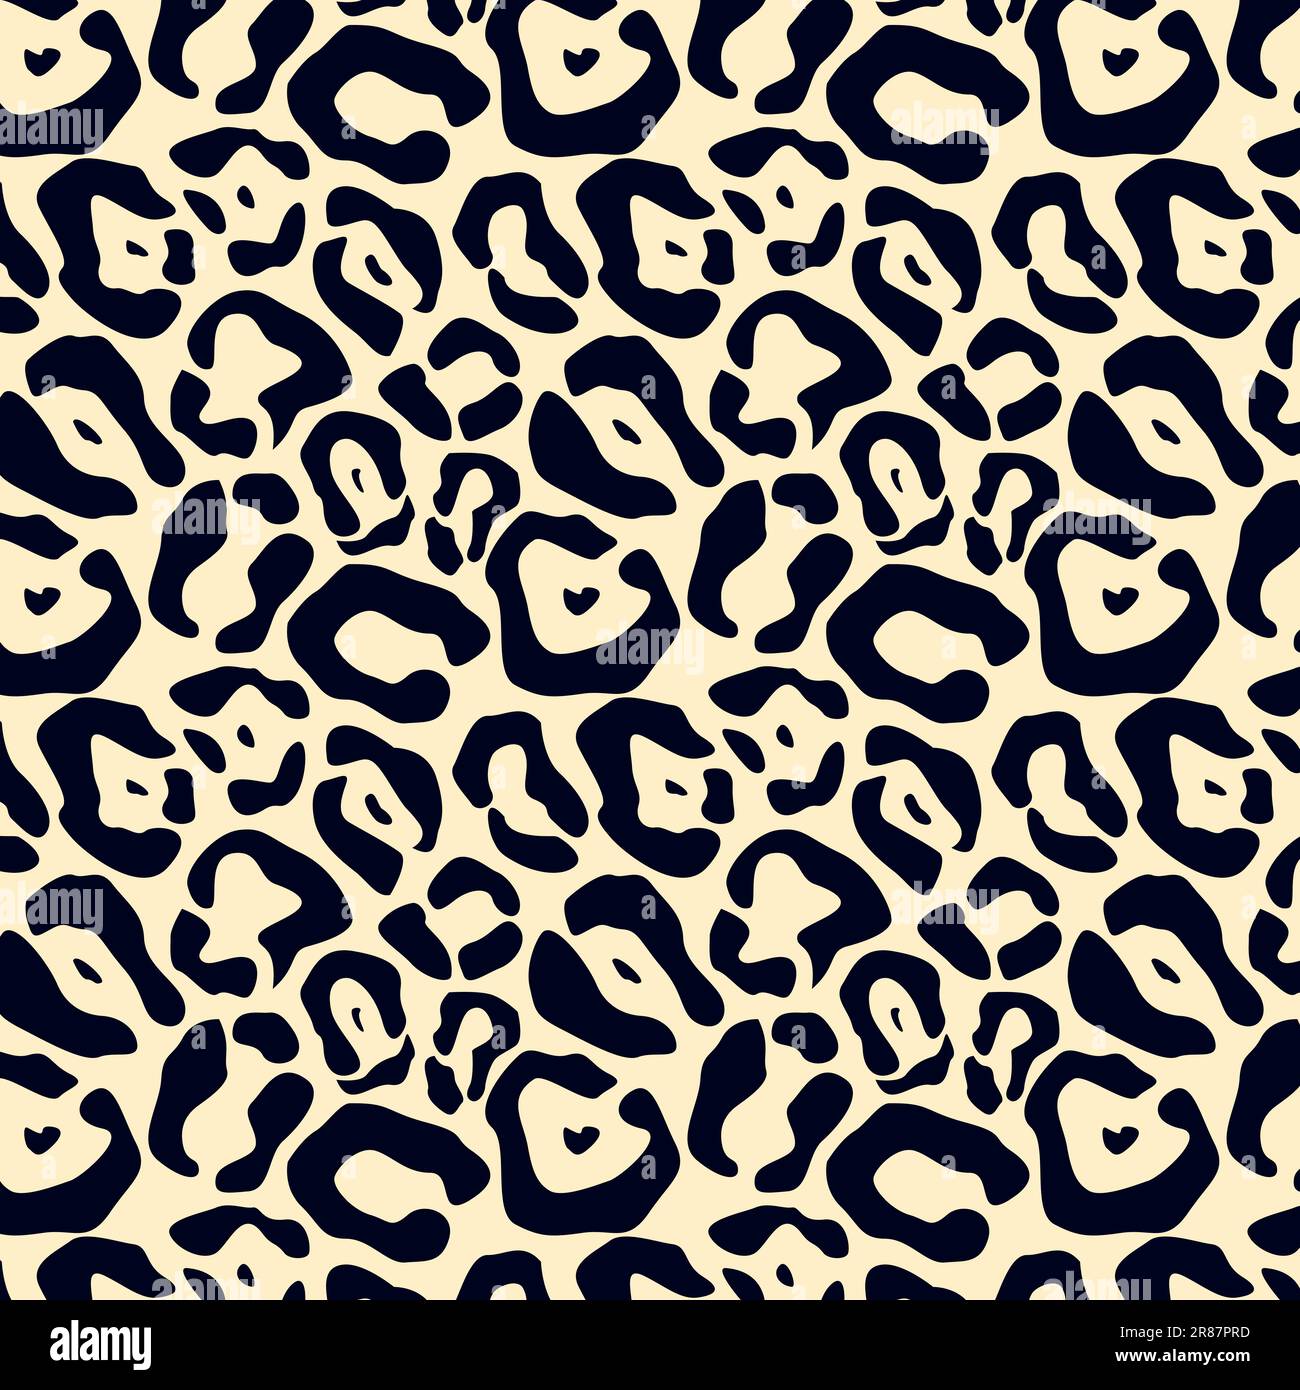 Leopard Skin Print Pattern. Fashionable Animal Skin Texture Background For Fabric, Paper, Textiles Stock Vector